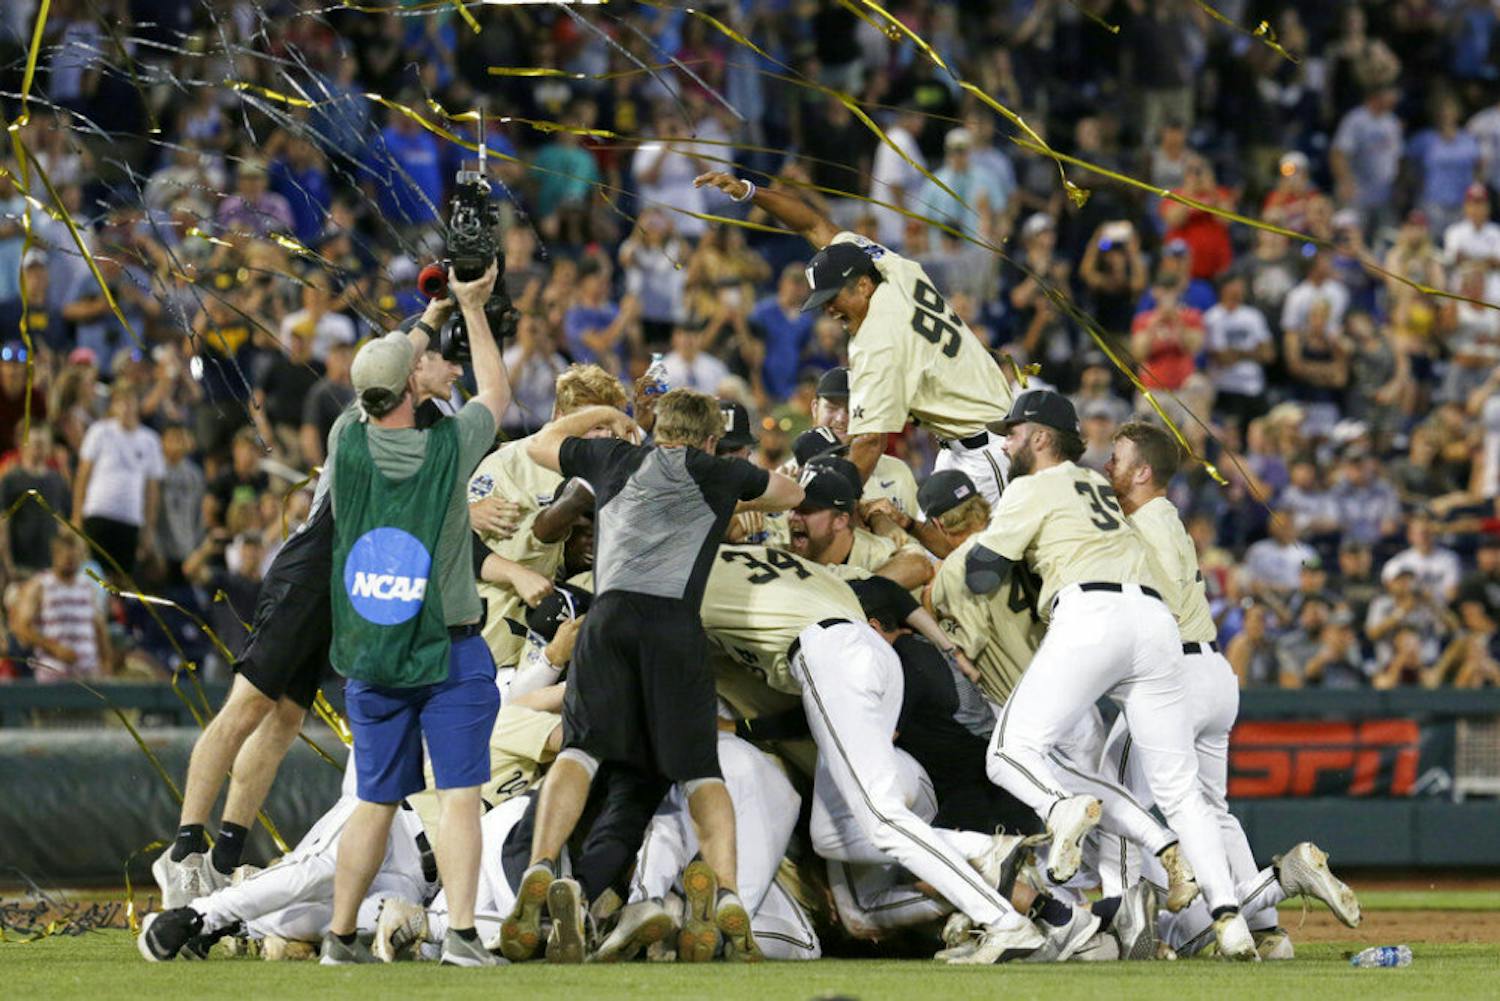 FILE - In this June 26, 2019, file photo, Vanderbilt players celebrate winning Game 3 and the champinship of the NCAA College World Series baseball finals against Michigan in Omaha, Neb. If not for the coronavirus pandemic, there would have been a World Series championship series Omaha, Nebraska. (AP Photo/Nati Harnik, File)